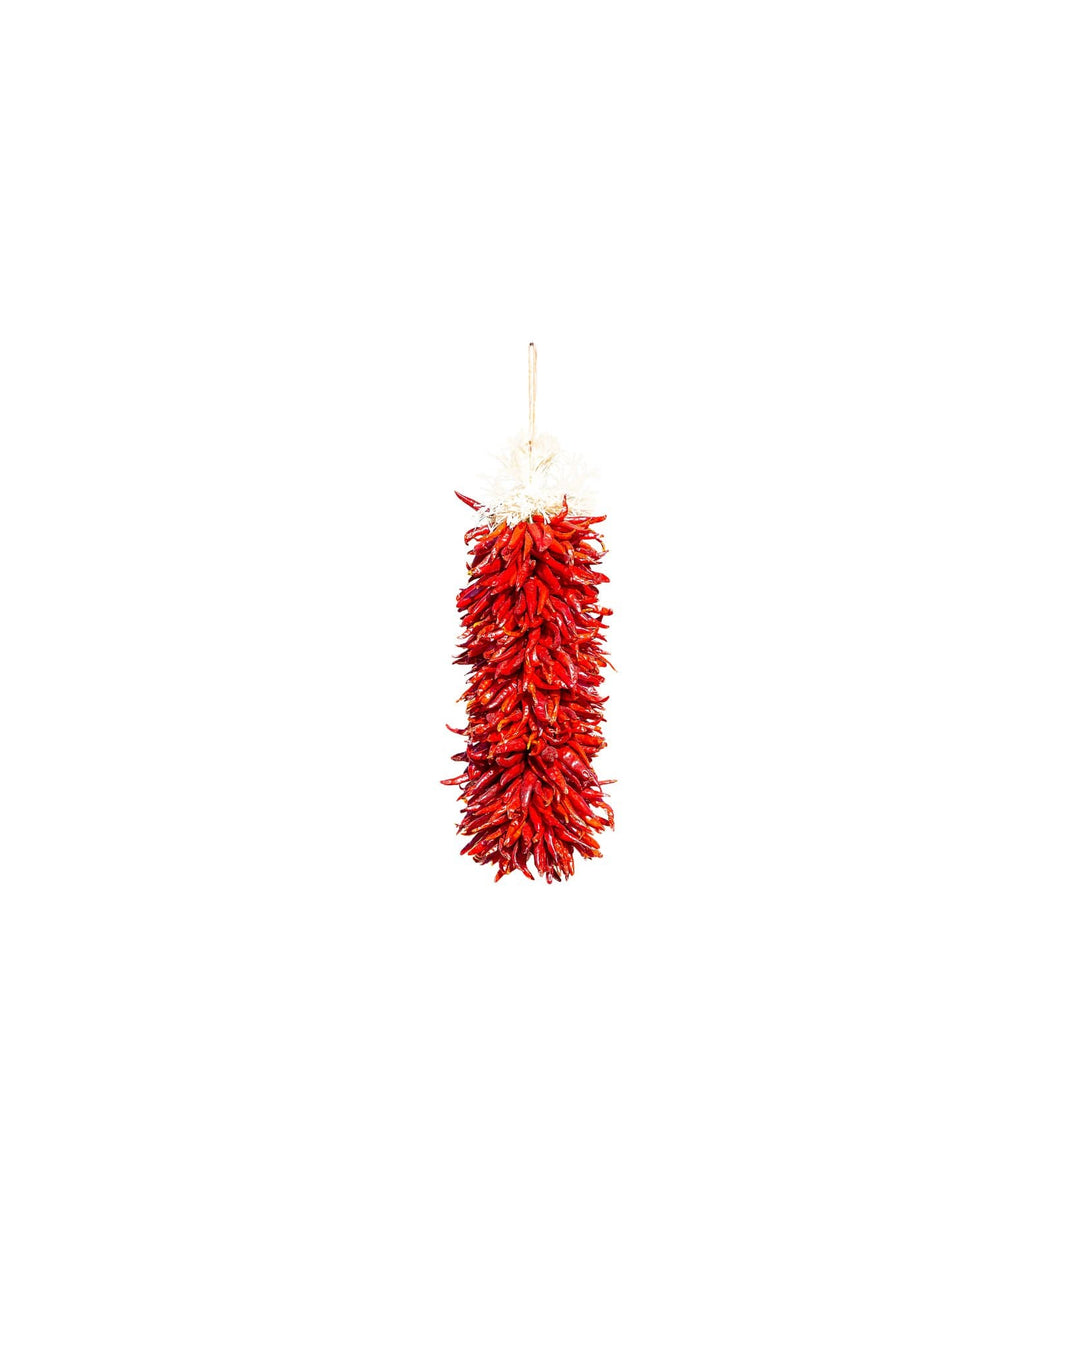 A vibrant red Chile Pequin Ristras with a fluffy white top, hanging against a white background.